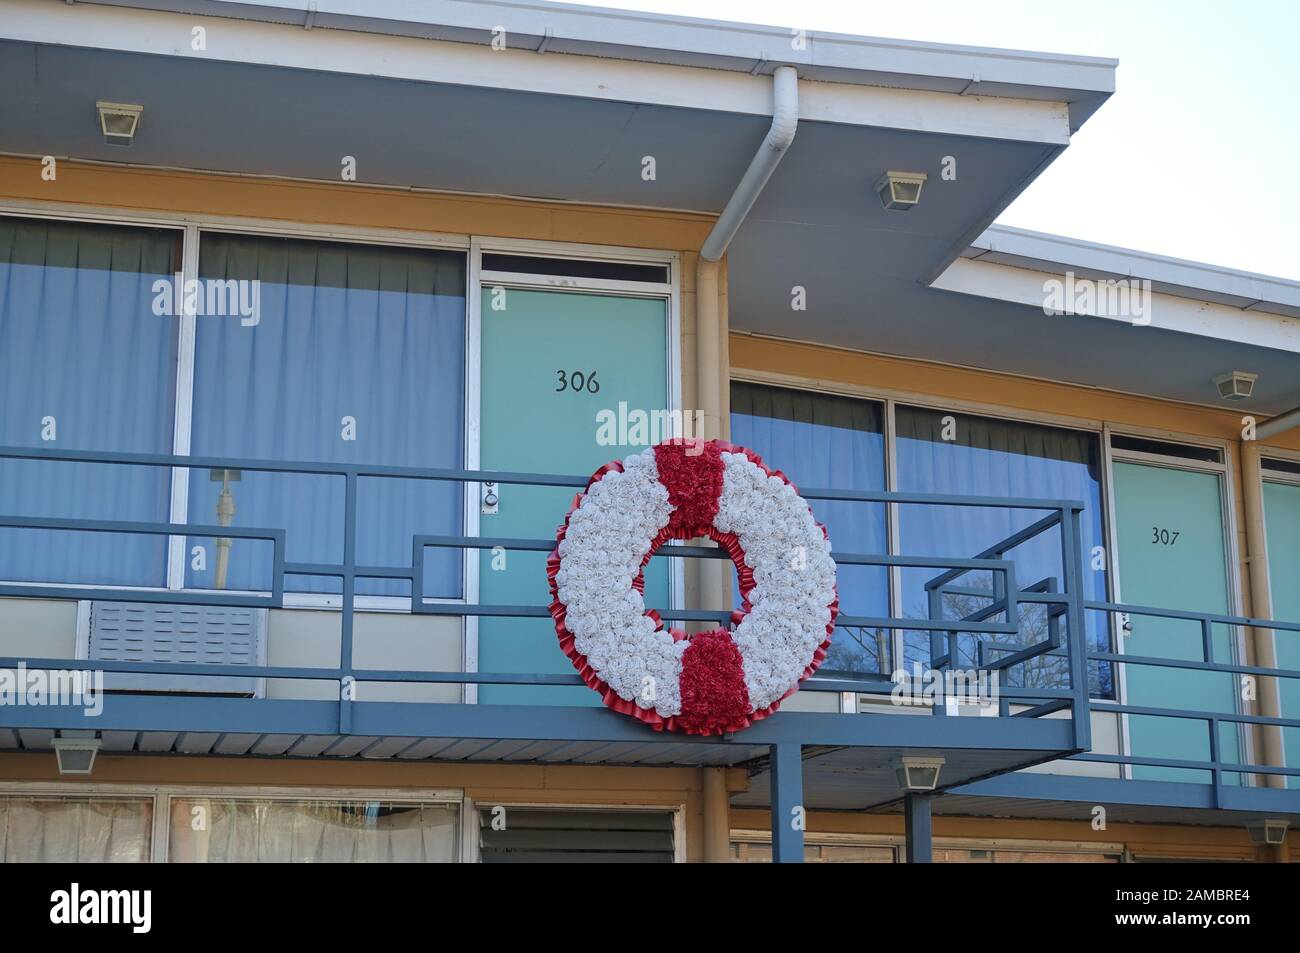 MEMPHIS, TN -5 JAN 2020- View of the National Civil Rights Museum at the Lorraine Motel, where Martin Luther King Jr. was assassinated in Memphis, Ten Stock Photo